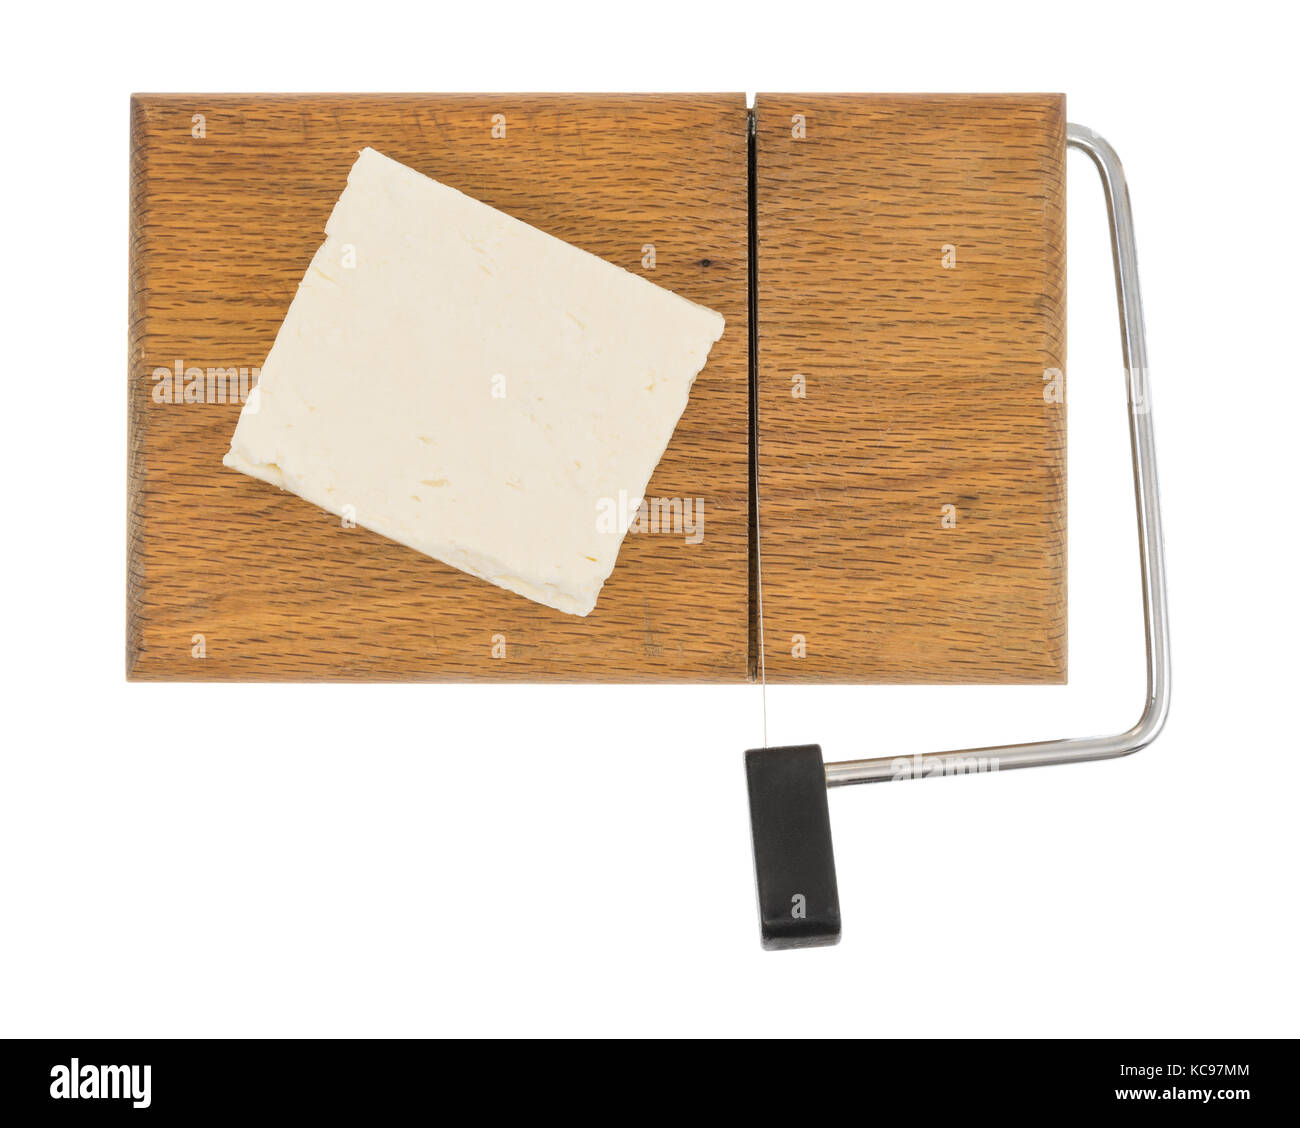 Top view of a block of feta cheese on a wood cheese slicer isolated on a white background. Stock Photo